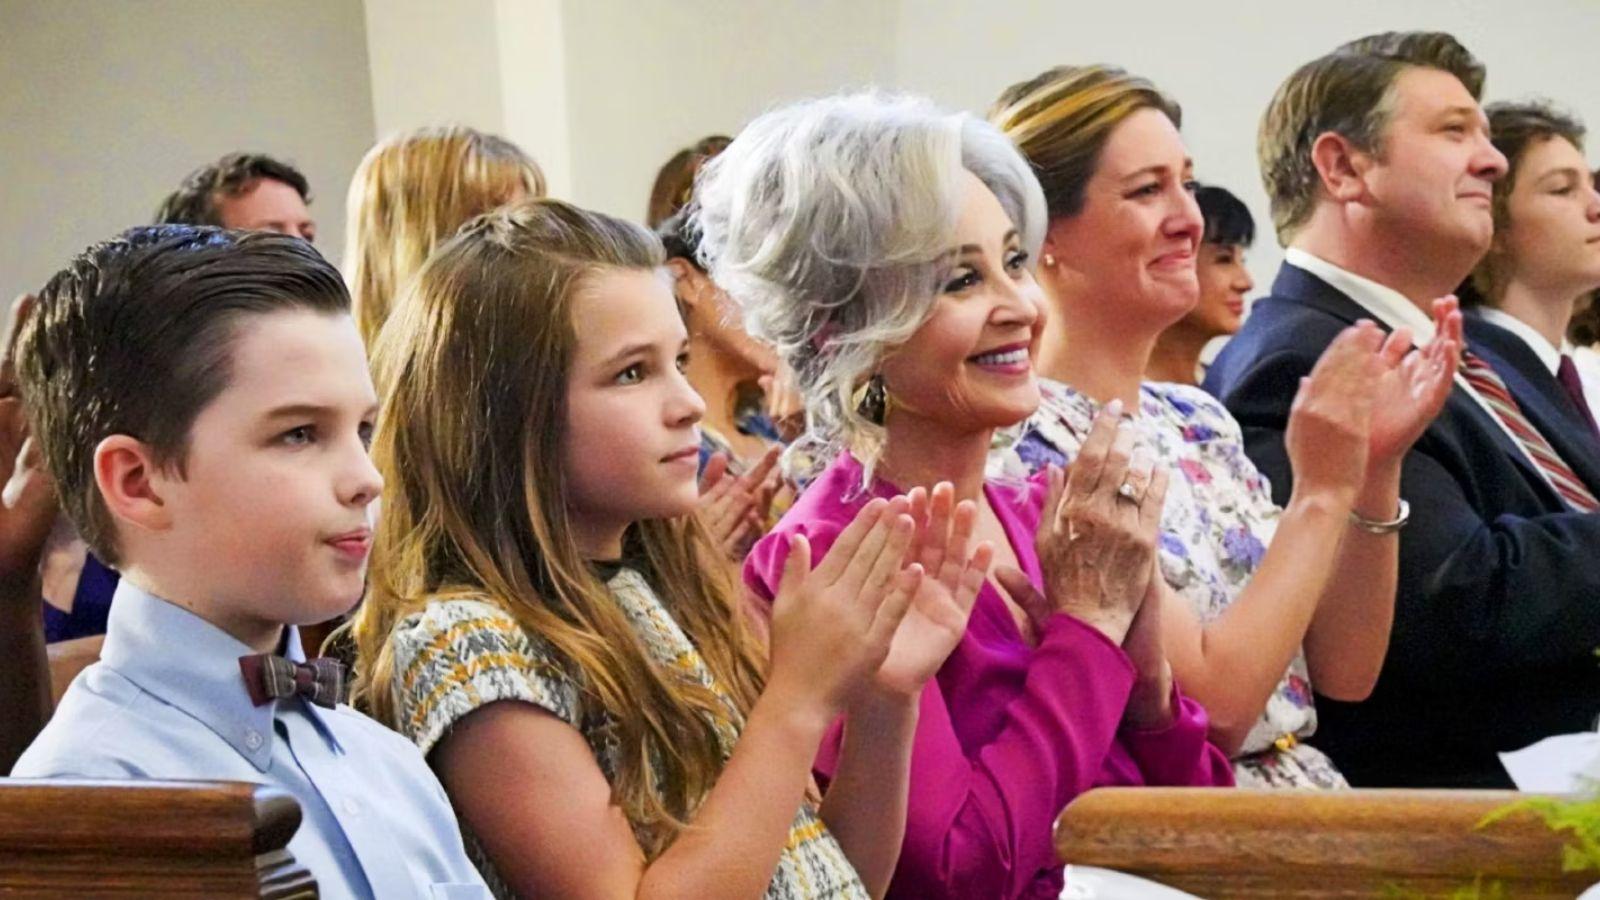 The Cooper family at church in Young Sheldon